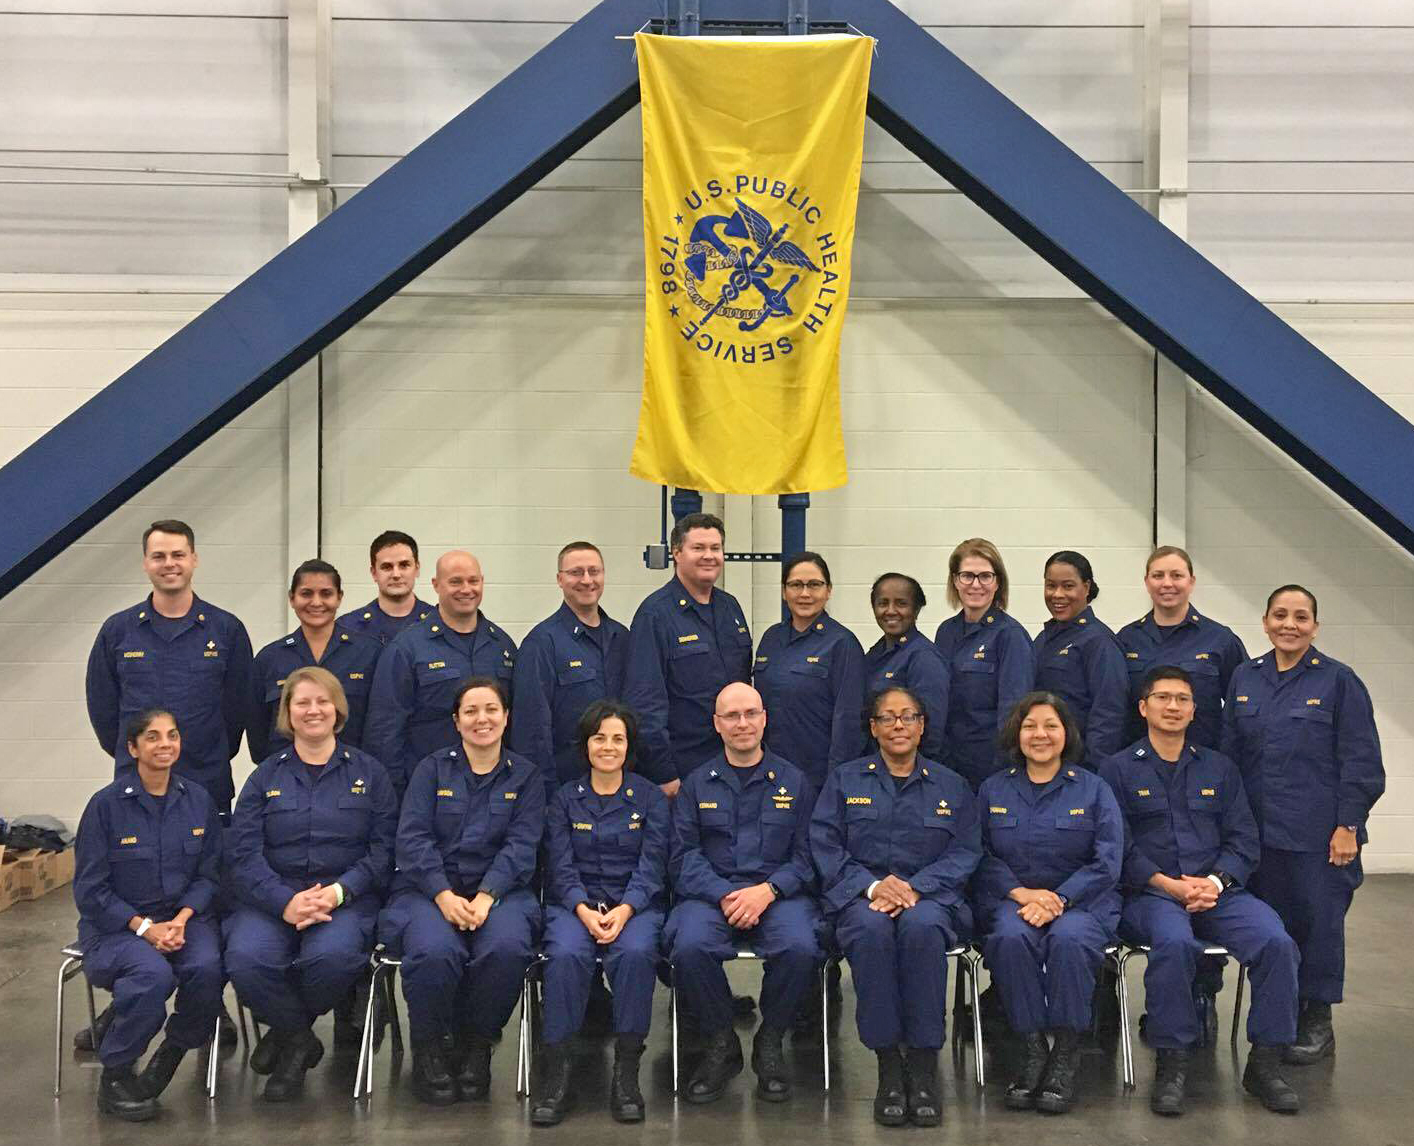 PHS Commissioned Corps officers from IHS who were deployed during Hurricane Harvey and stationed at the George R. Brown Convention Center in Houston, Texas.